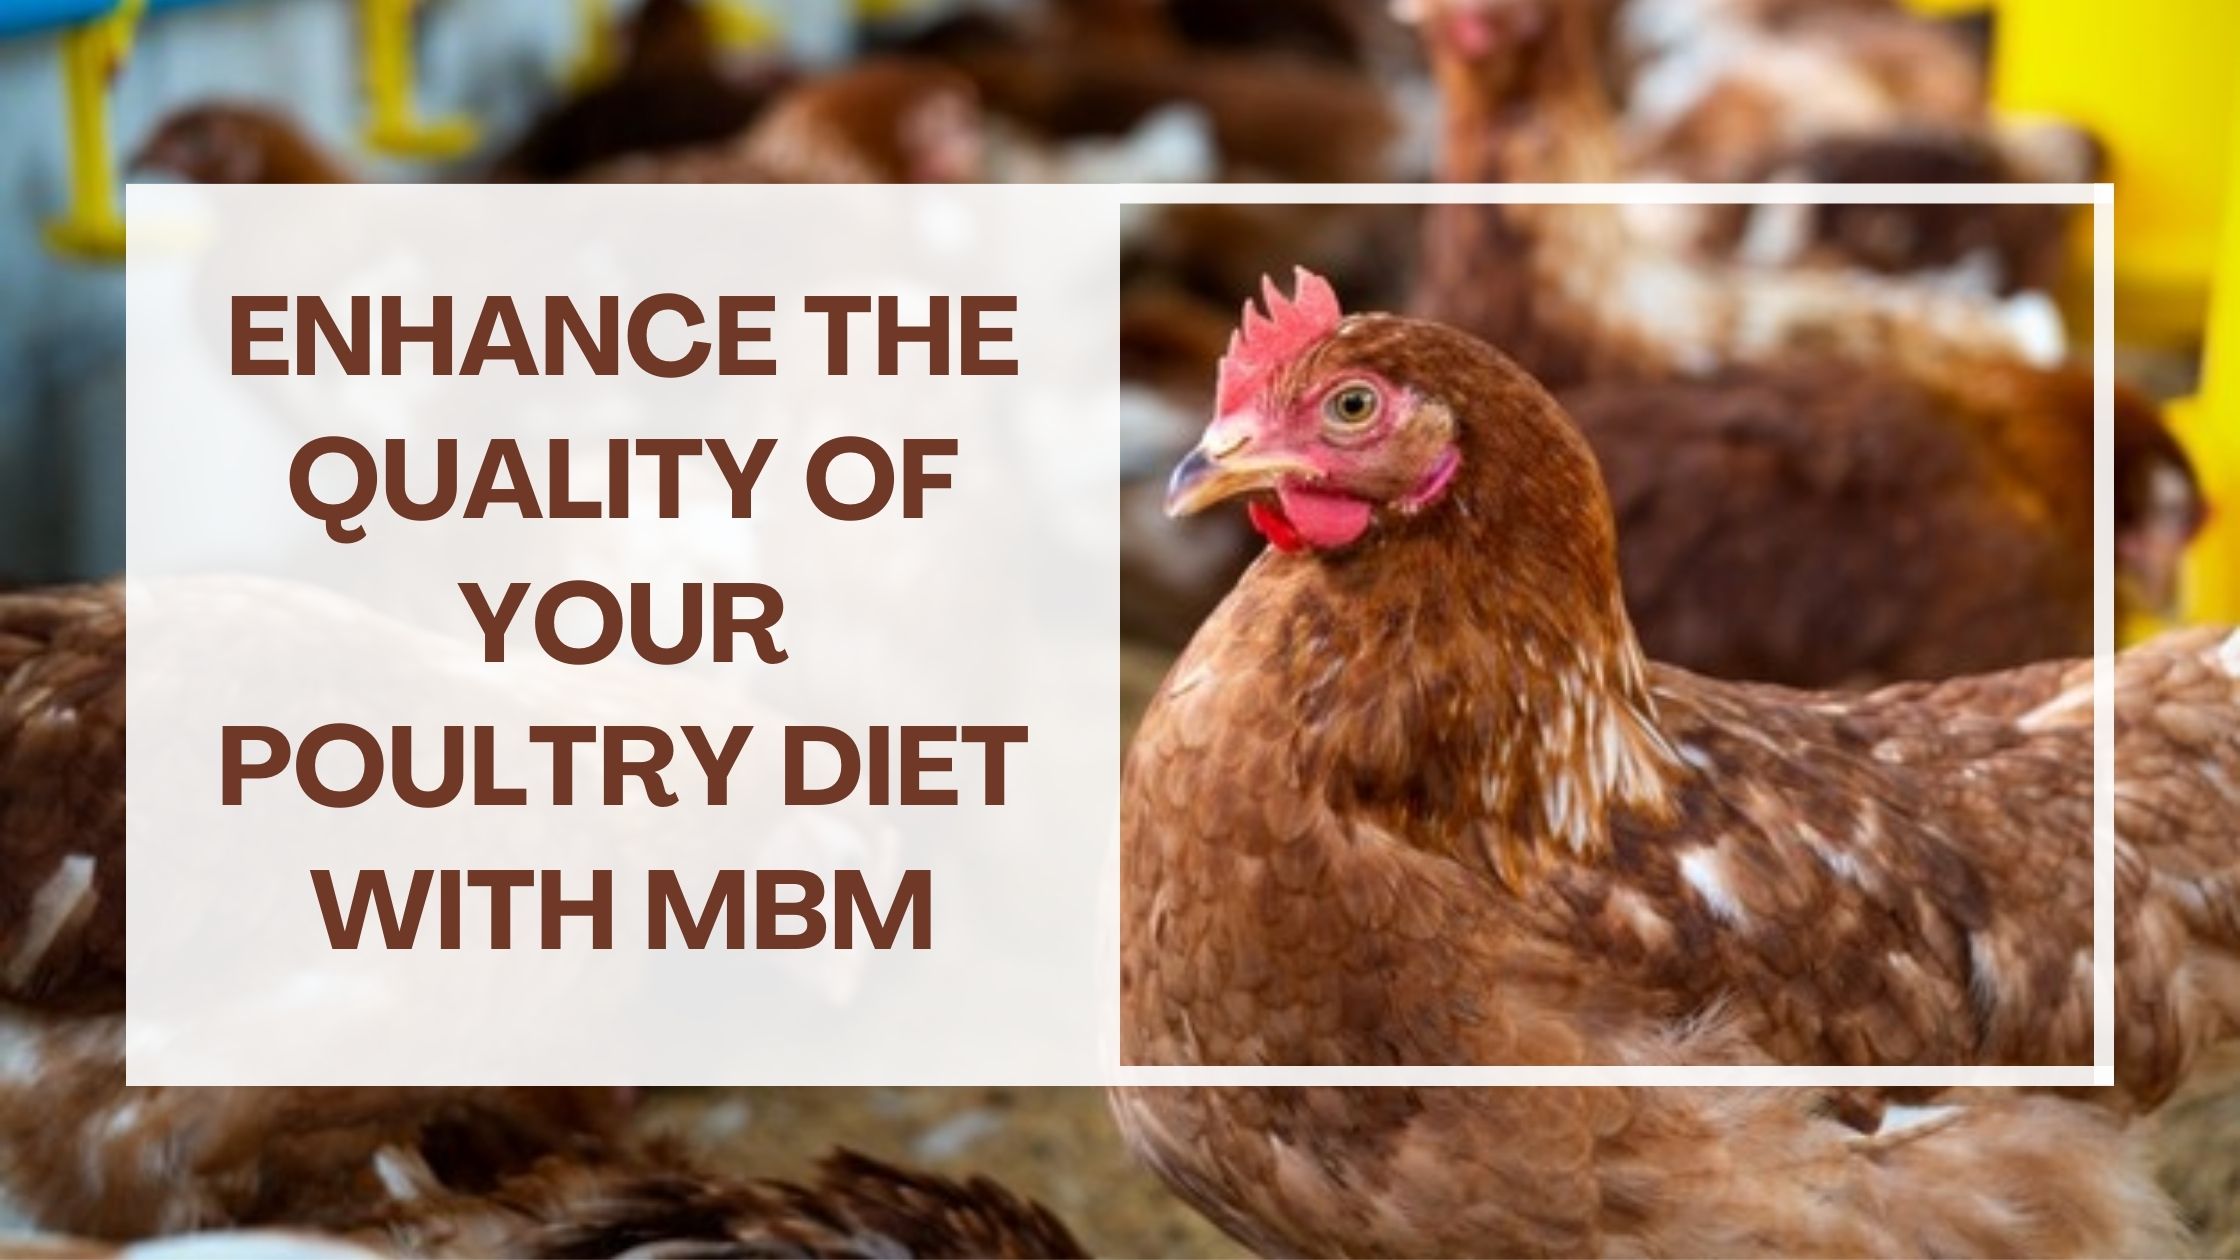 Enhance The Quality Of Your Poultry Diet With MBM